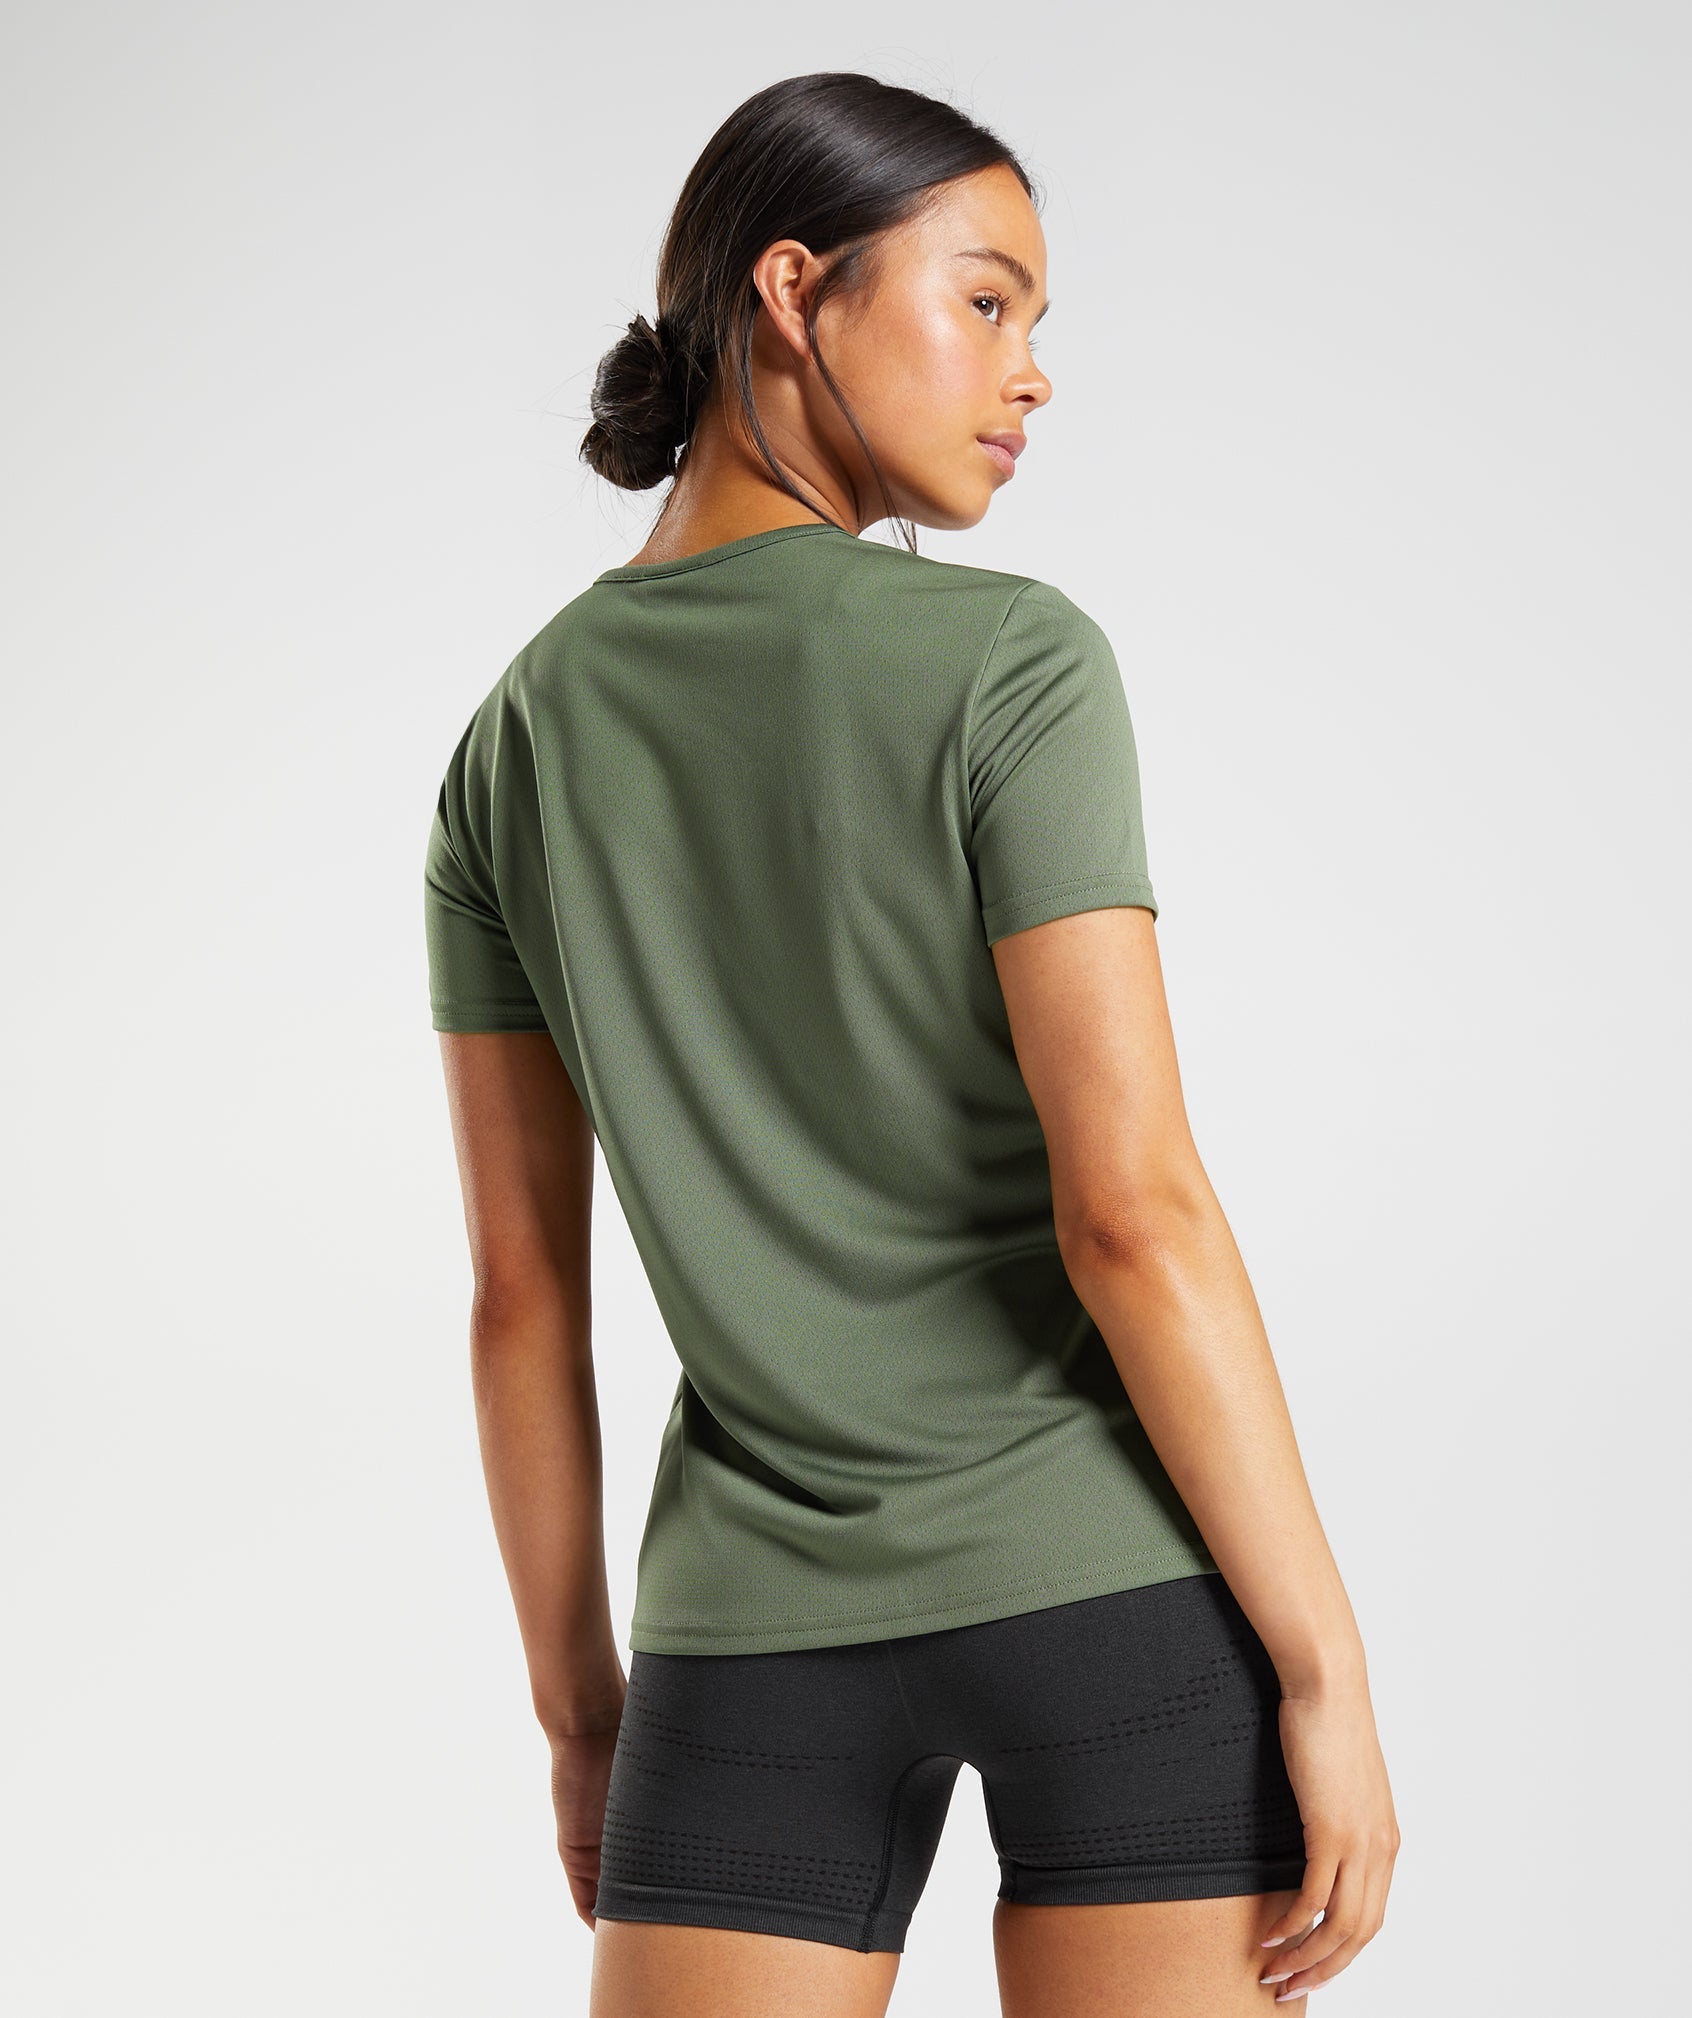 Training T-Shirt in Core Olive - view 2